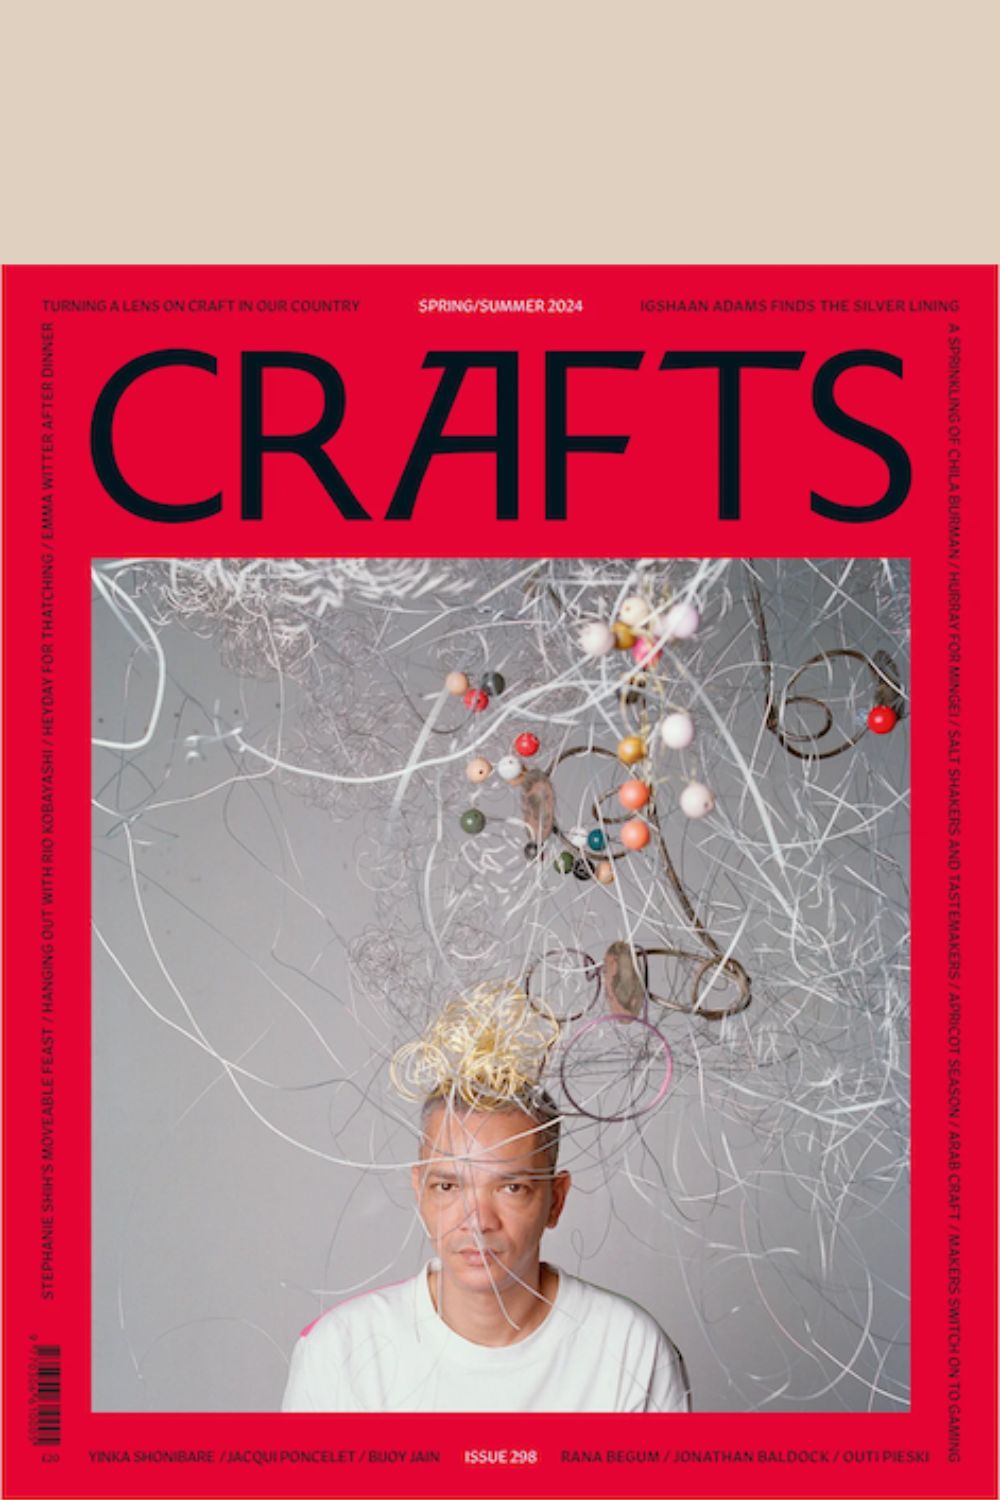 Crafts Magazine issue 298 cover